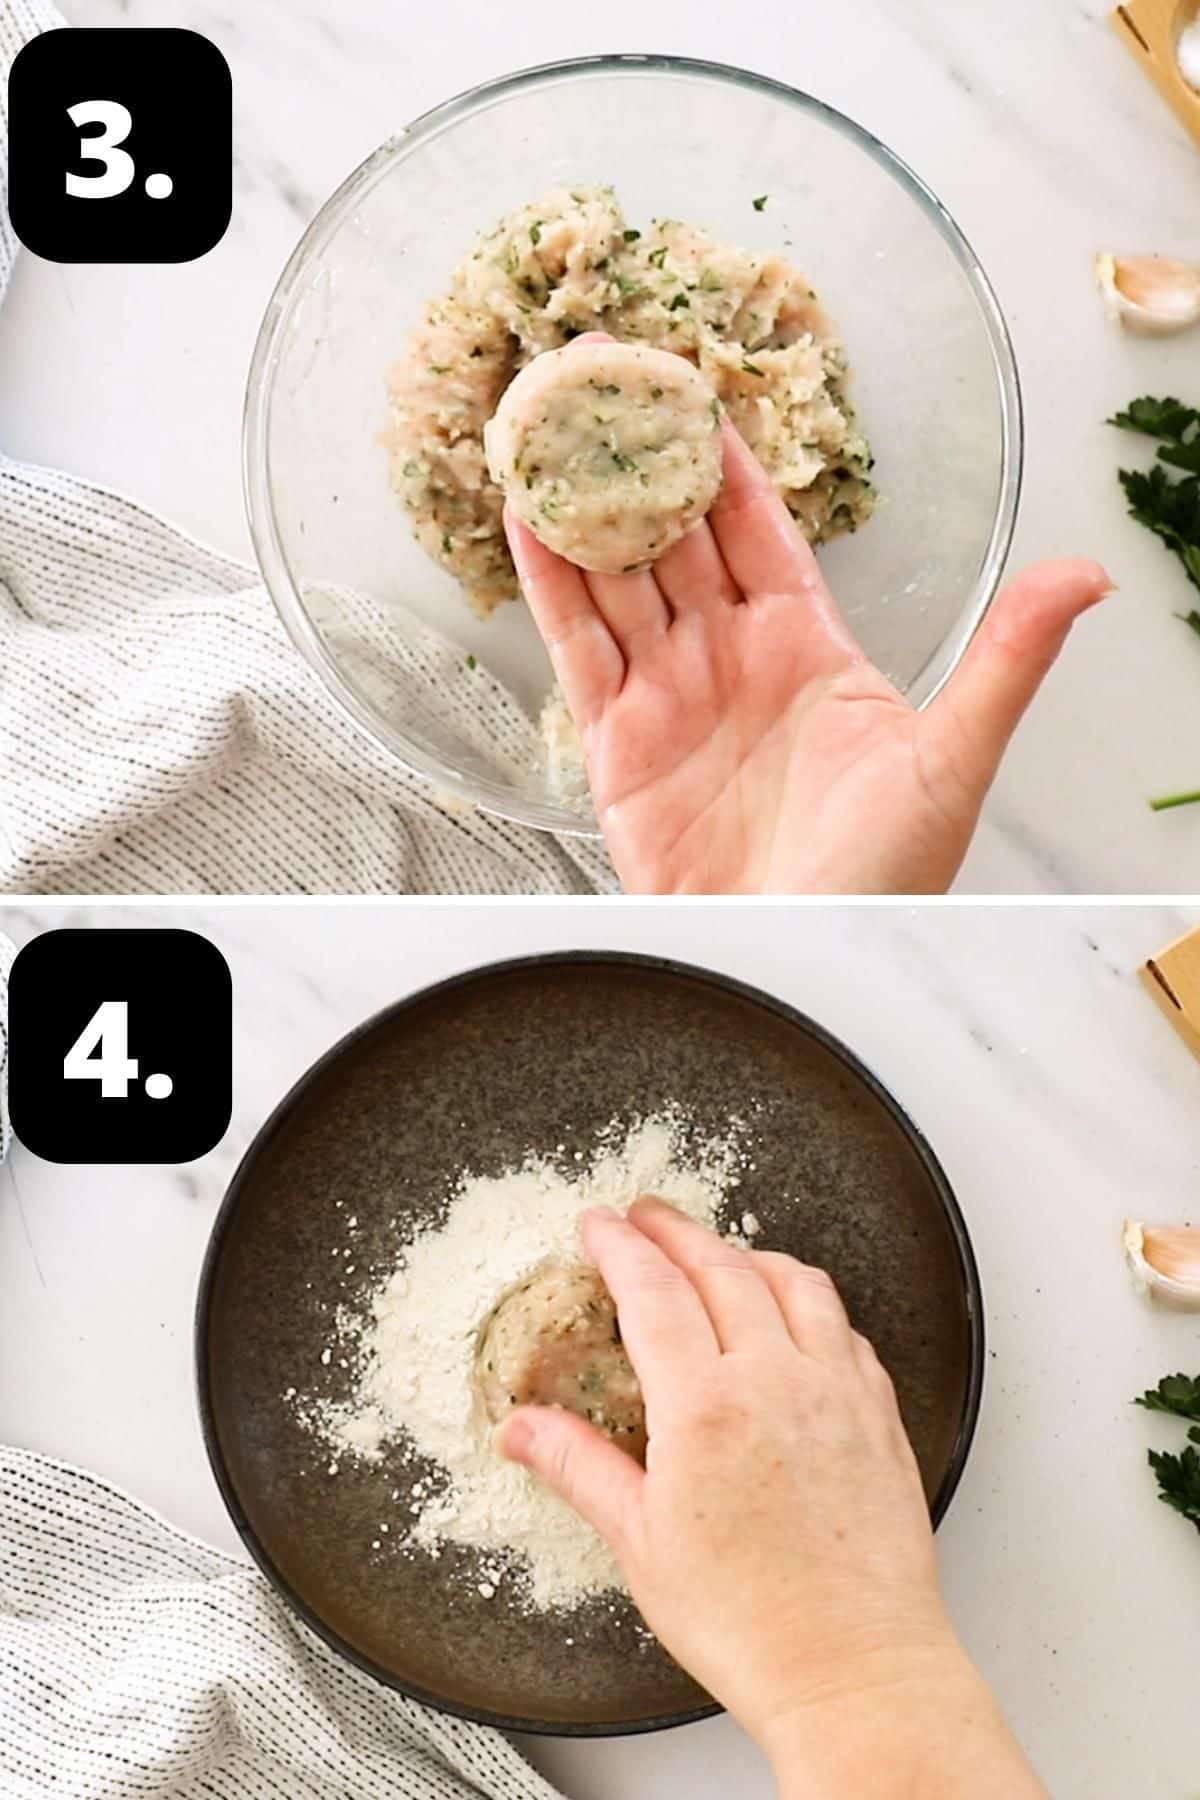 Steps 3-4 of preparing this recipe - shaping the patties and then coating in flour.